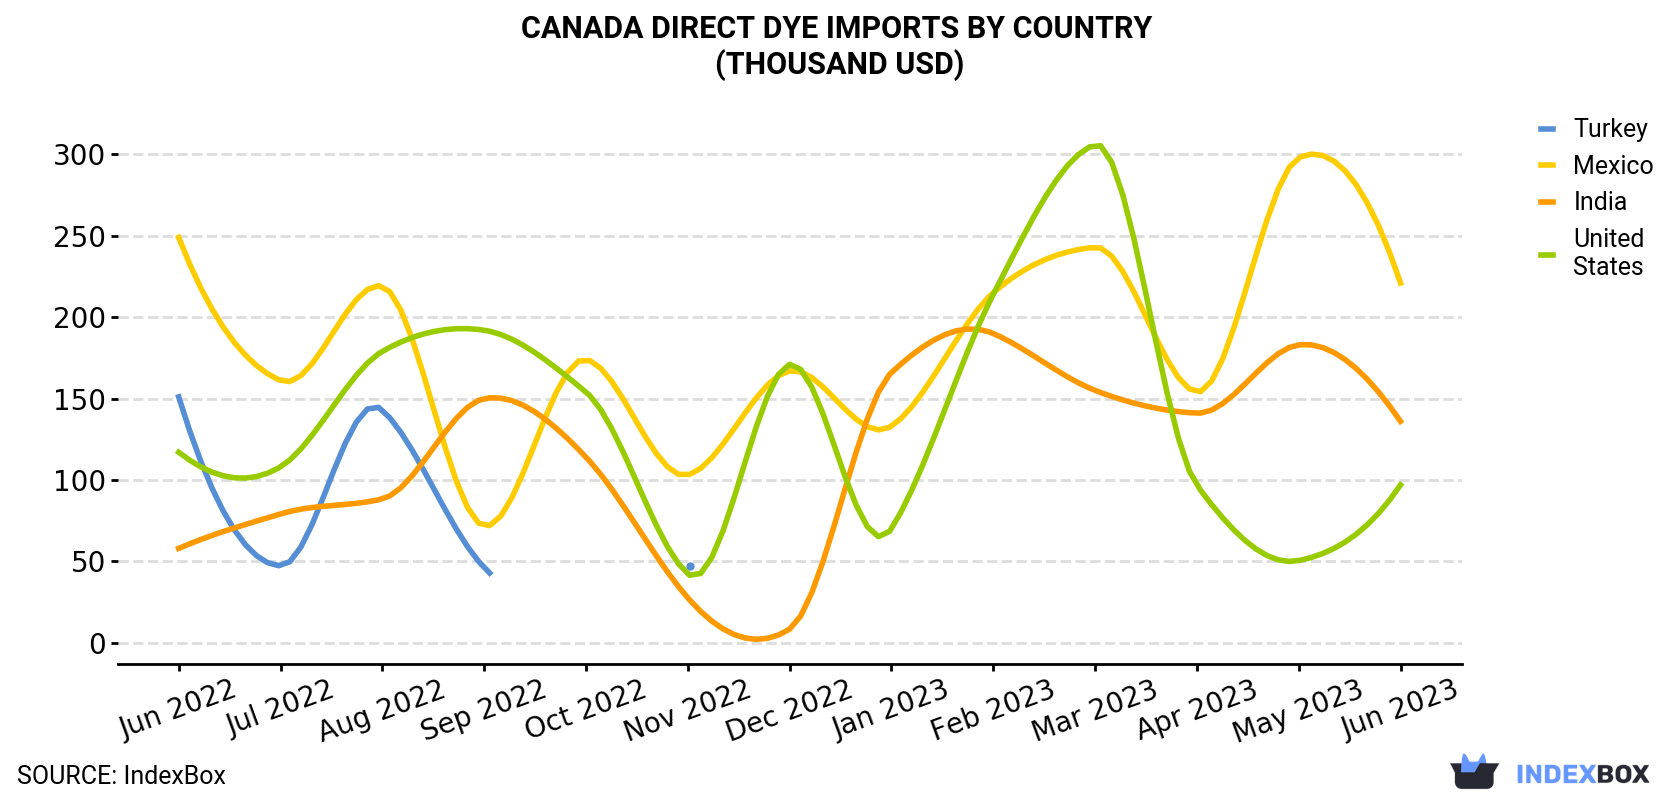 Canada Direct Dye Imports By Country (Thousand USD)